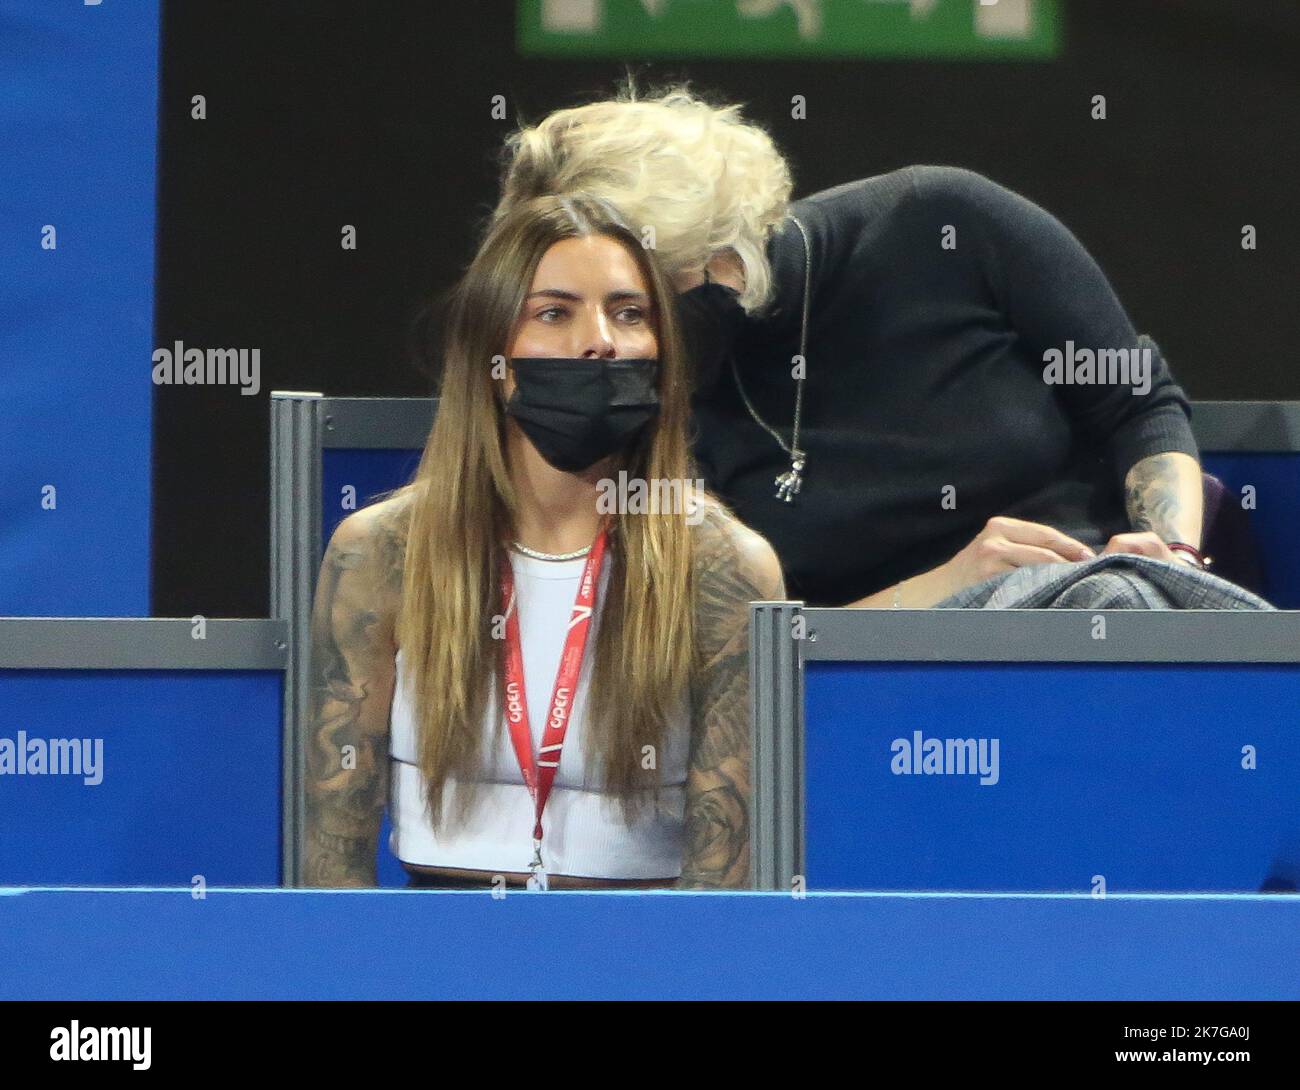 ©Laurent Lairys/MAXPPP - Sophia Thomalla, girlfriend of Alexander Zverev of Germany during the Open Sud 2022, ATP 250 tennis tournament on February 05 , 2022 at Sud de France Arena in Montpellier, France - Photo Laurent Lairys / Stock Photo